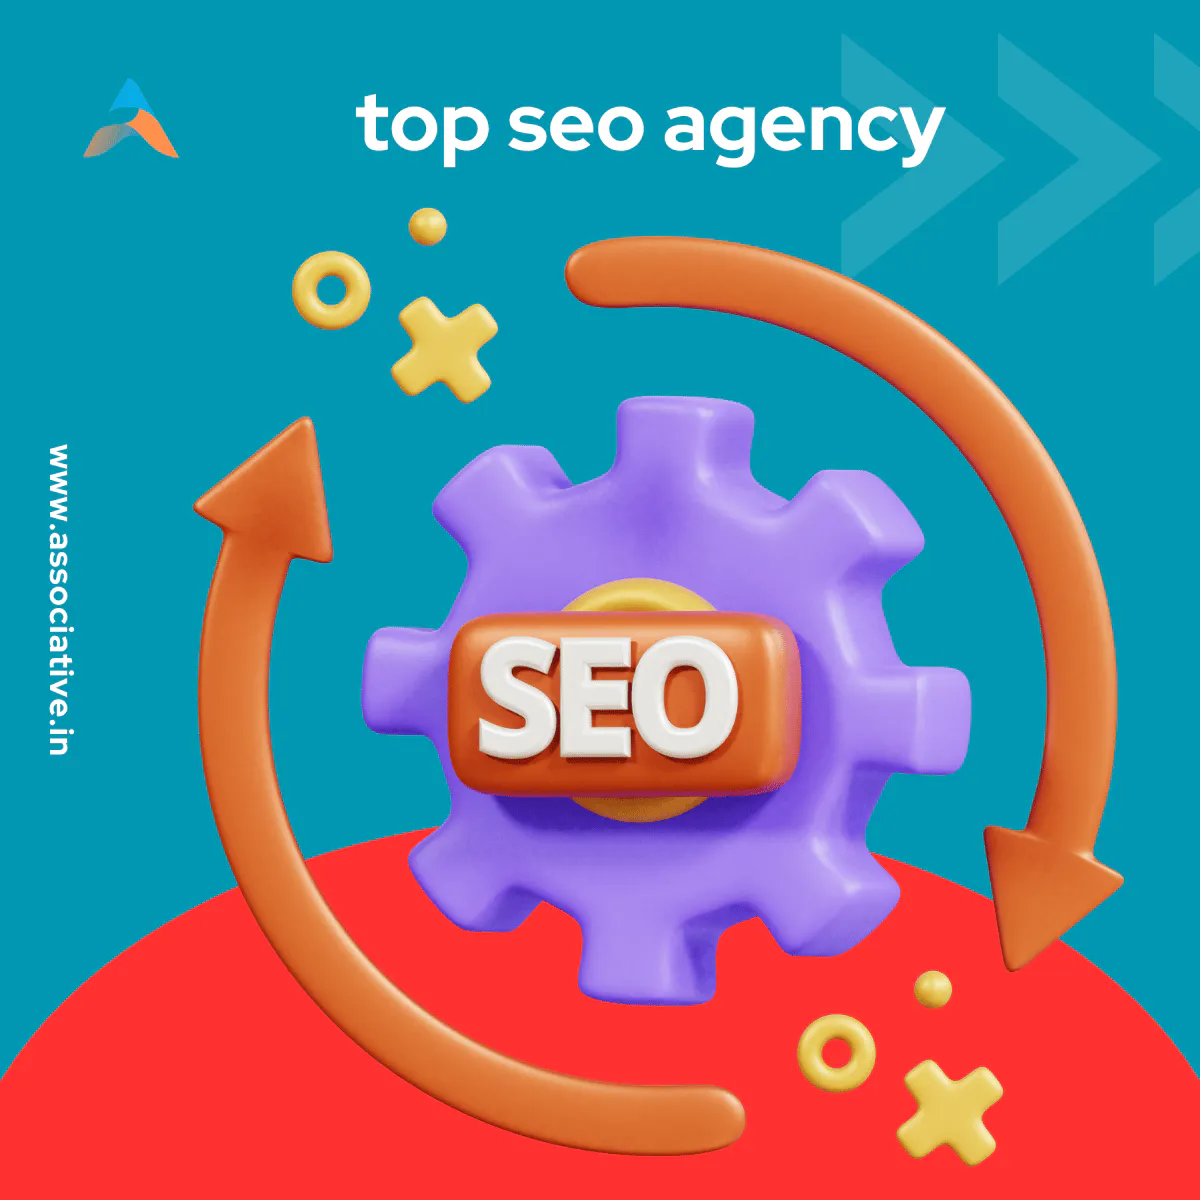 Your Trusted SEO Optimization Agency Partner